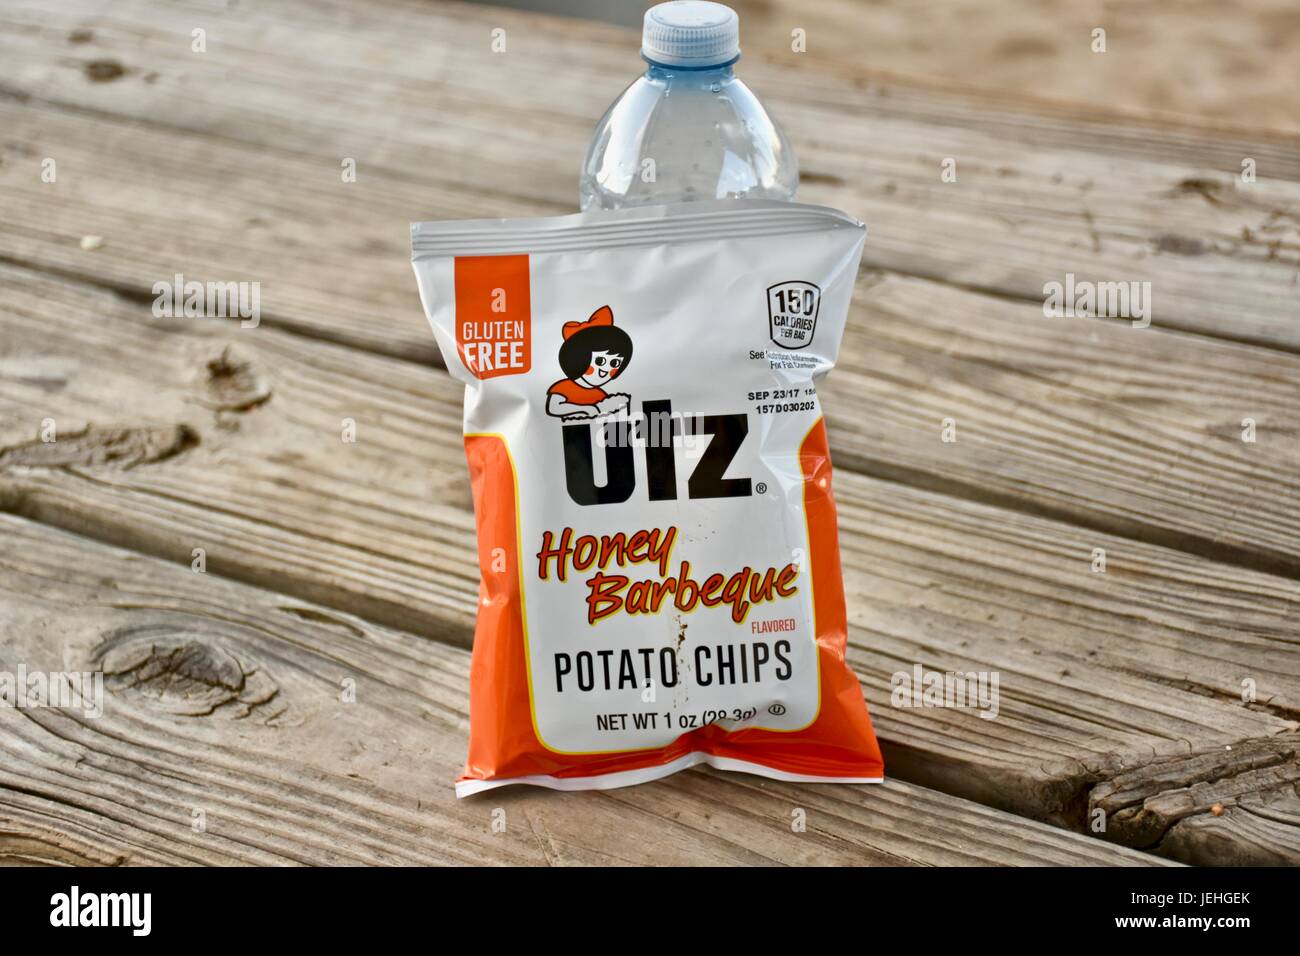 Utz miele chips barbecue Foto Stock